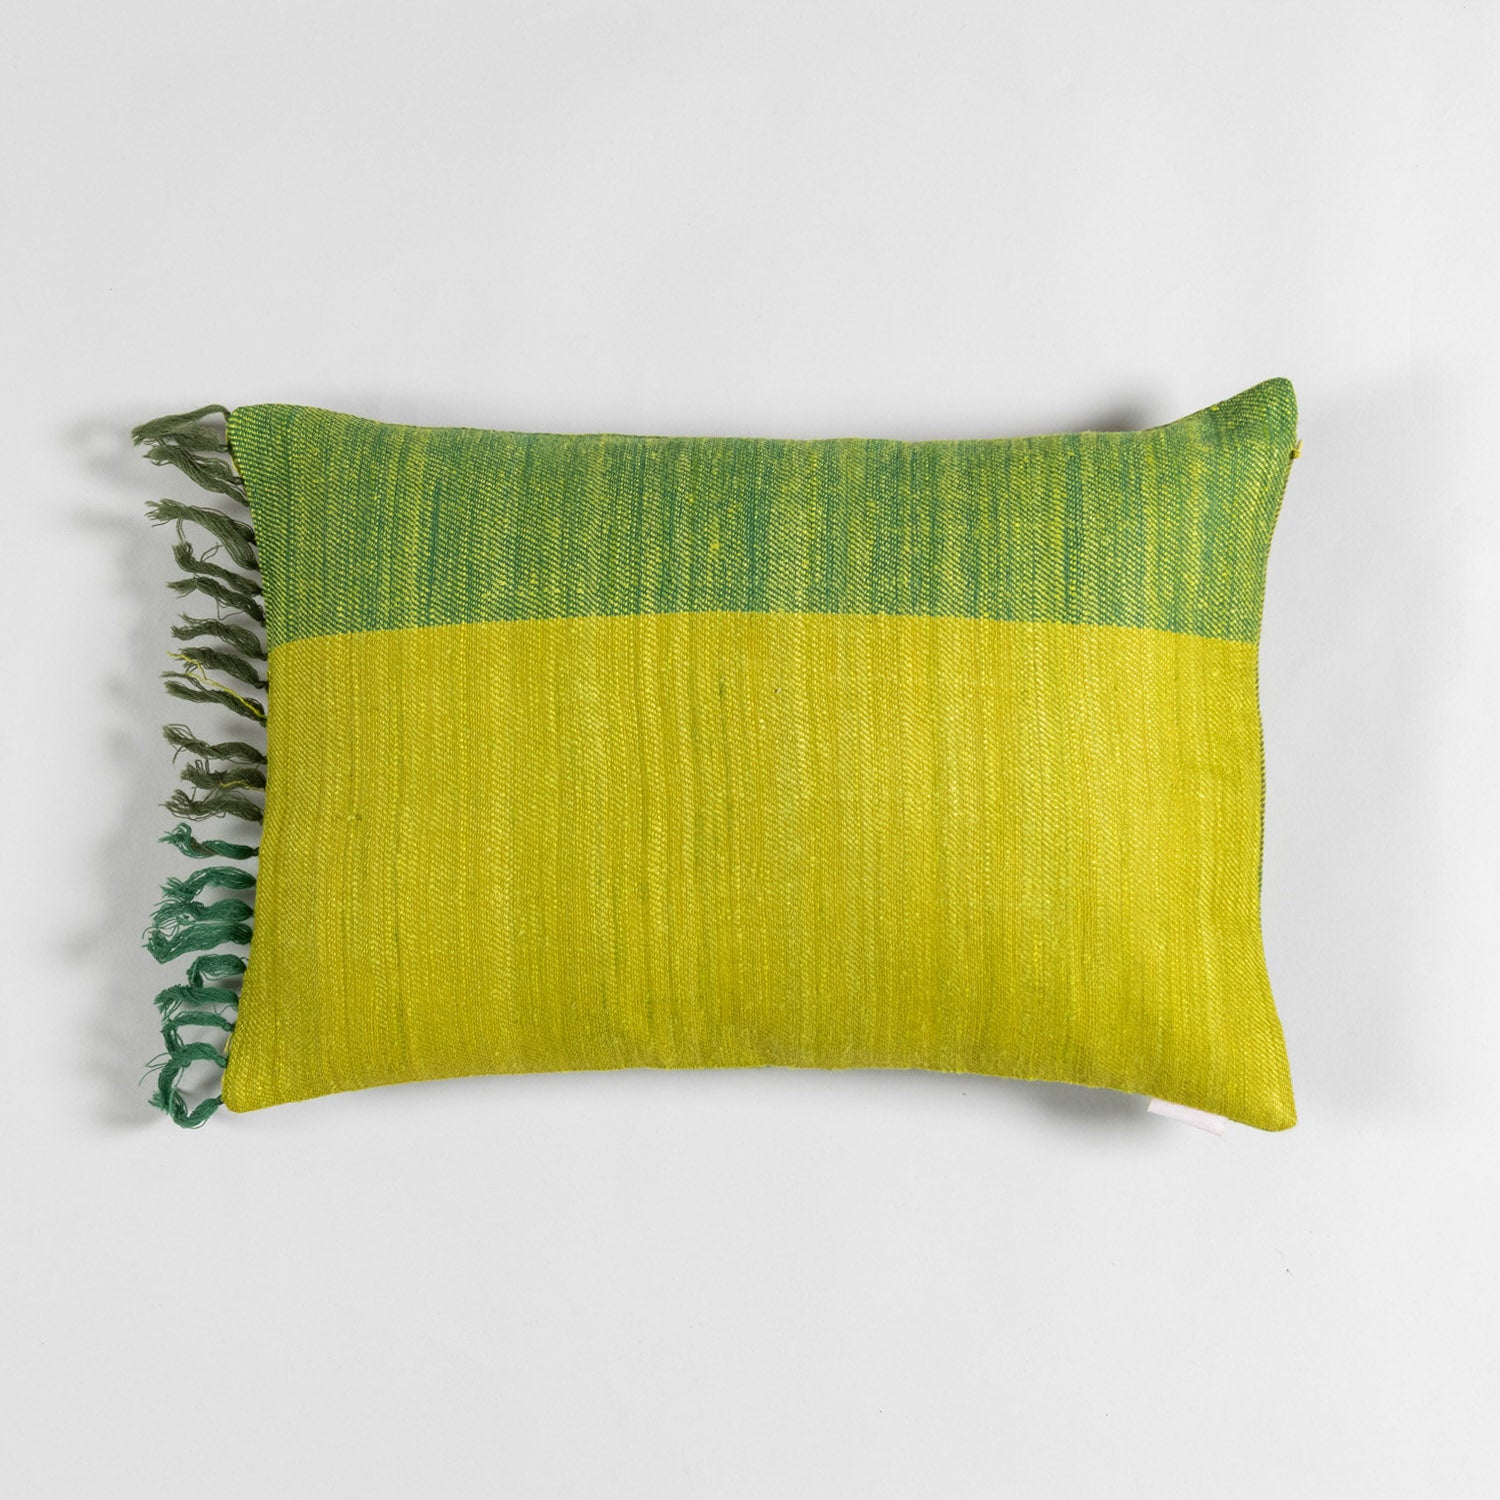 Handwoven Upcycled Lime Green Wool & Oak Silk Cushion Cover - 12x18